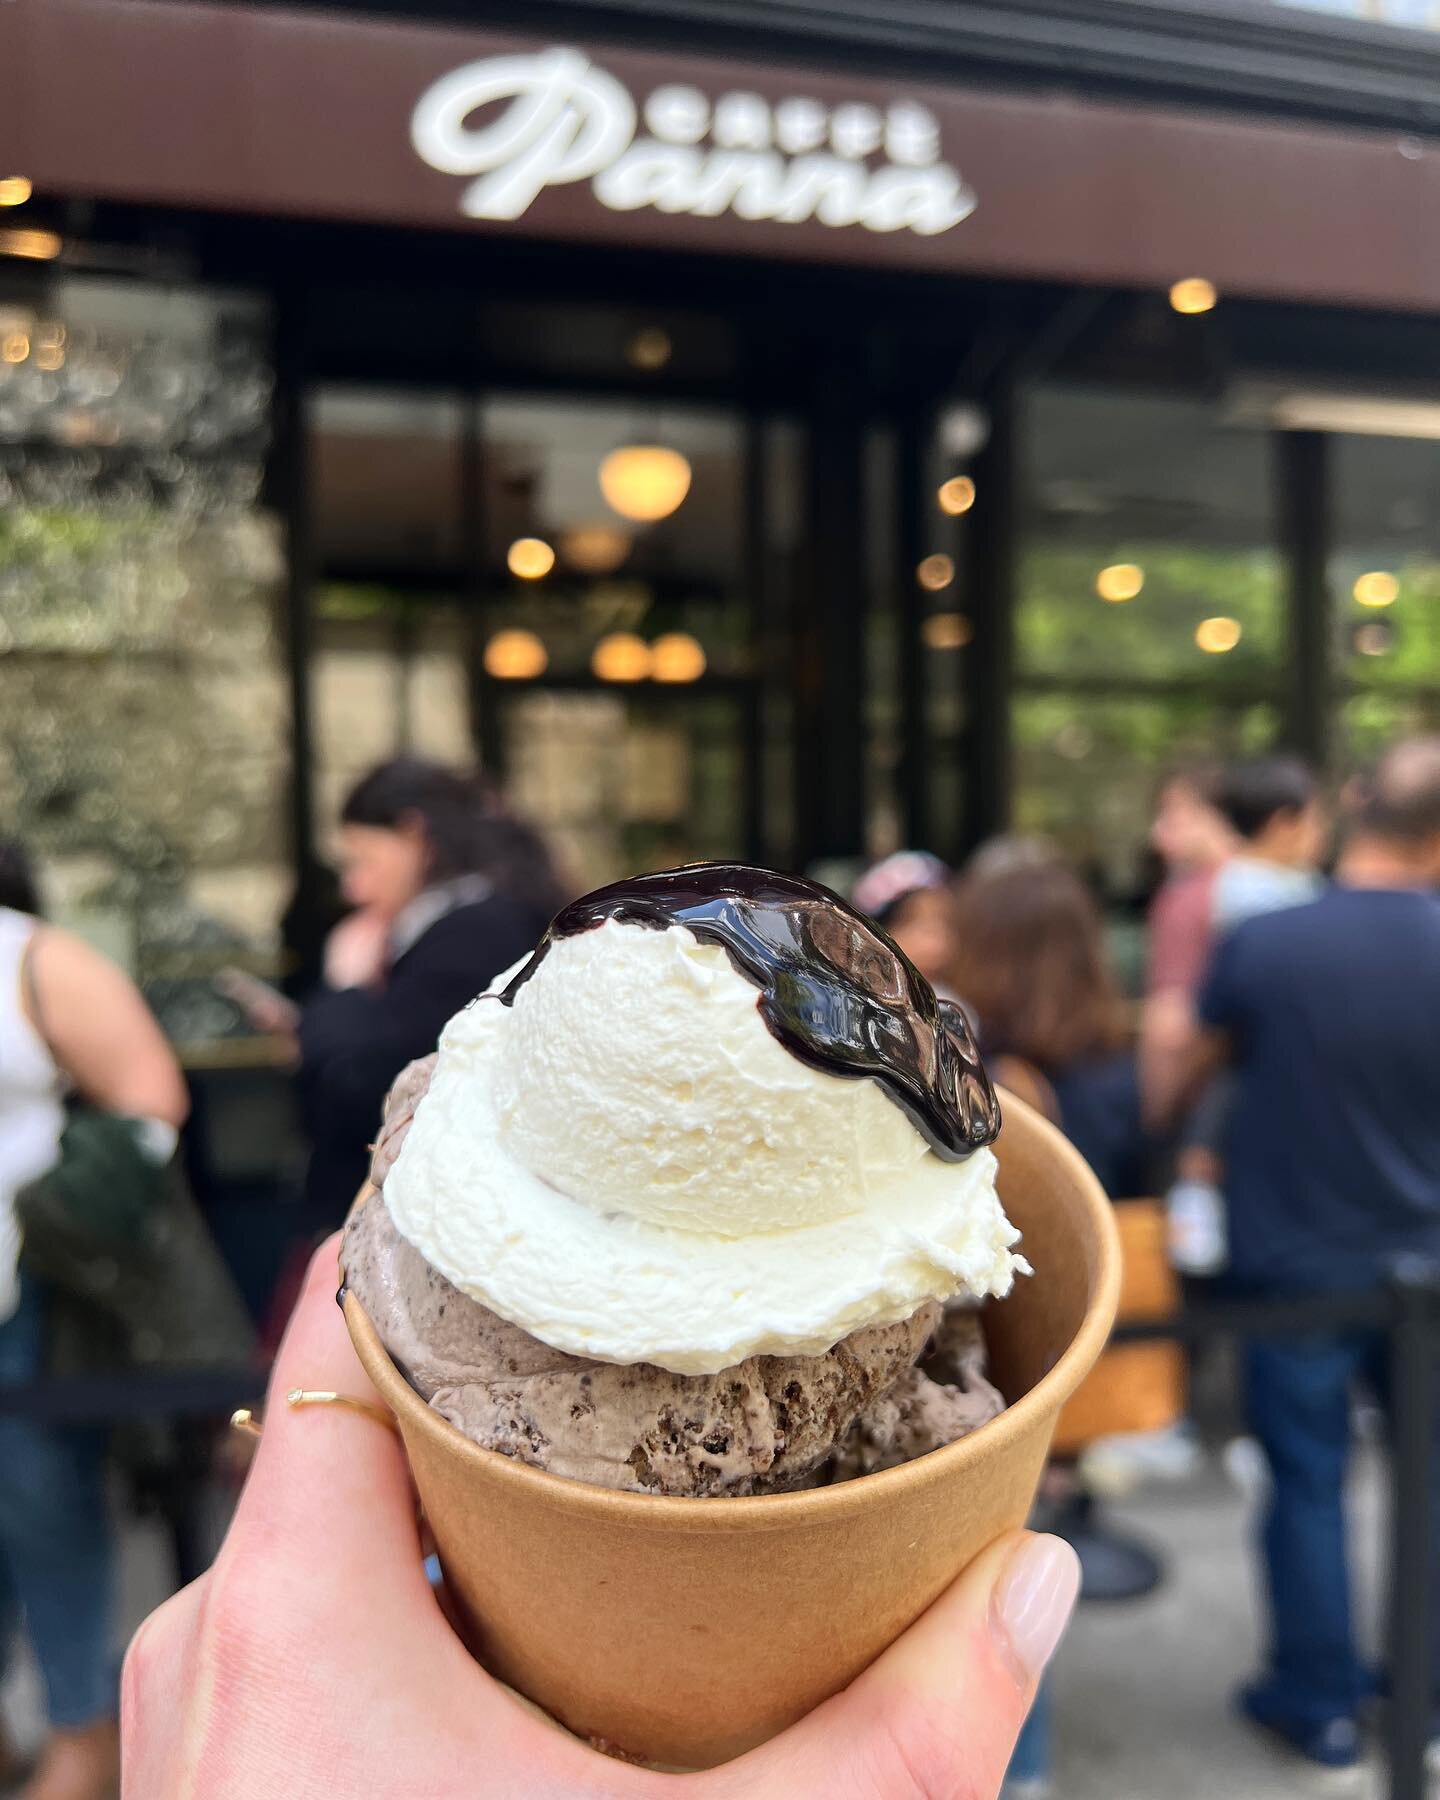 No edits needed for these glorious ice cream creations from @caffepanna &hellip; can&rsquo;t believe this is my first time trying this well known establishment. Worth waiting in a 20 minute line for 🥰🤩🥳 we tried the cookies n&rsquo; panna (Oreo in